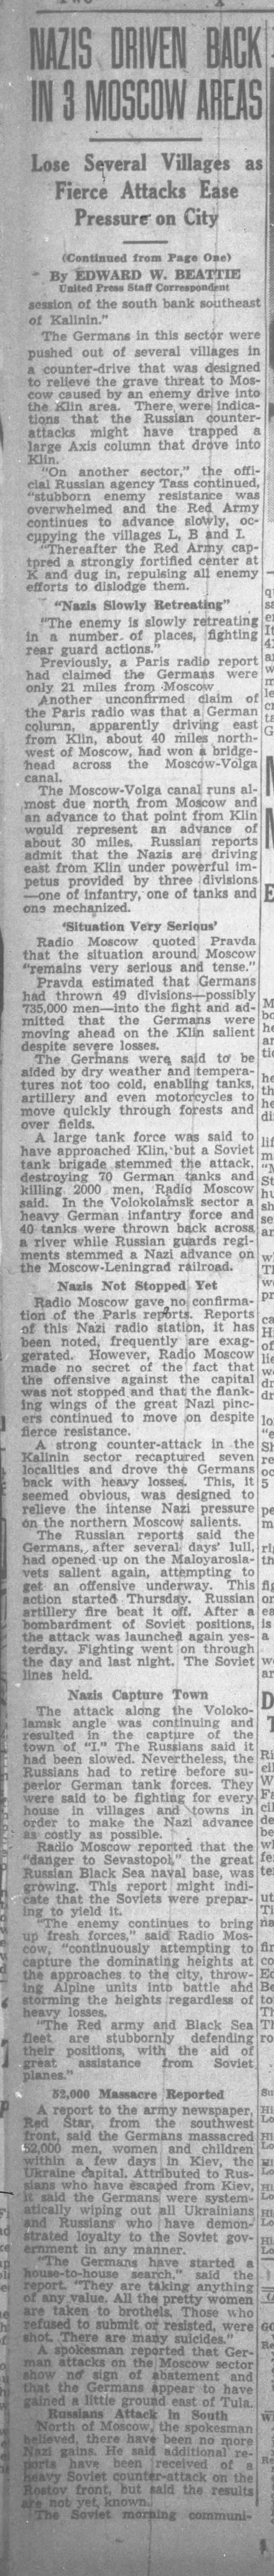 Nazis Driven Back in 3 Moscow Areas